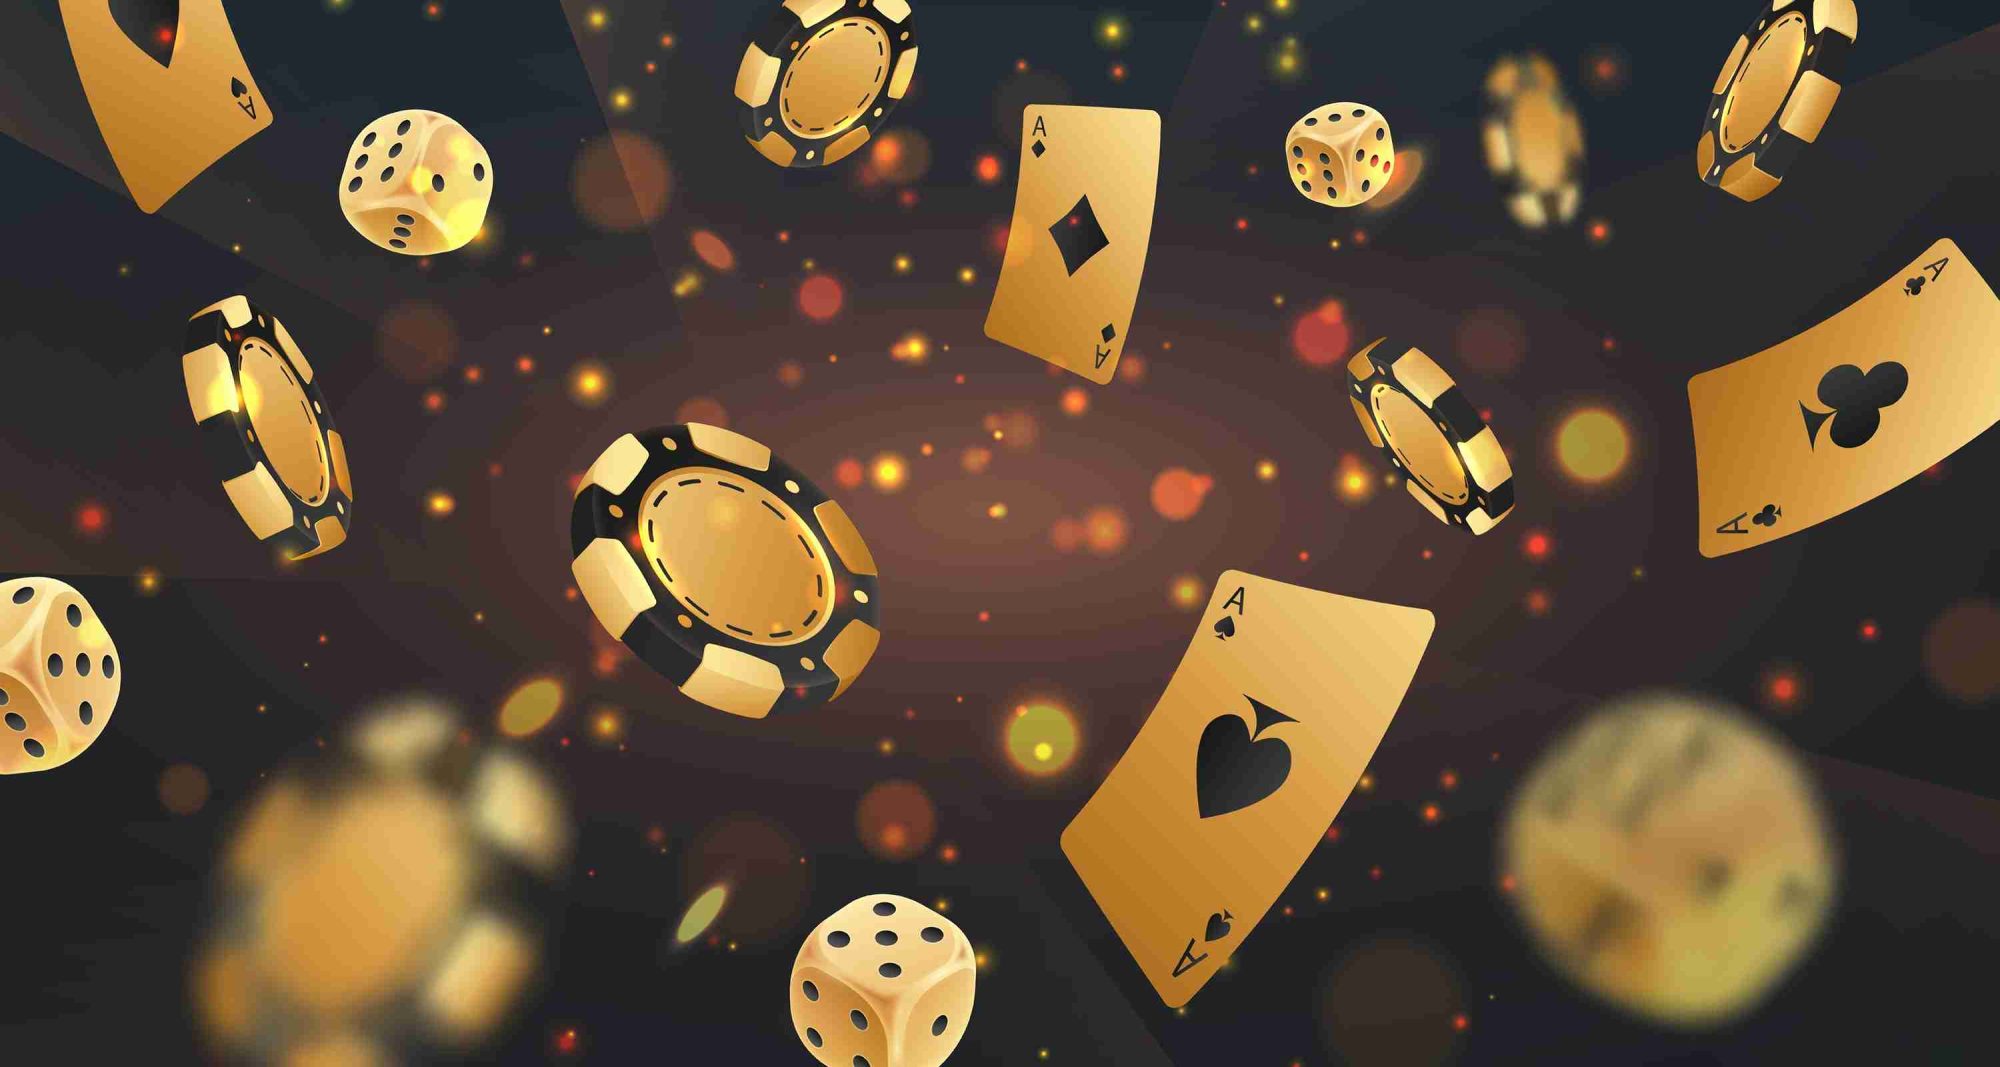 casino themed image of falling poker chips, cards and dice